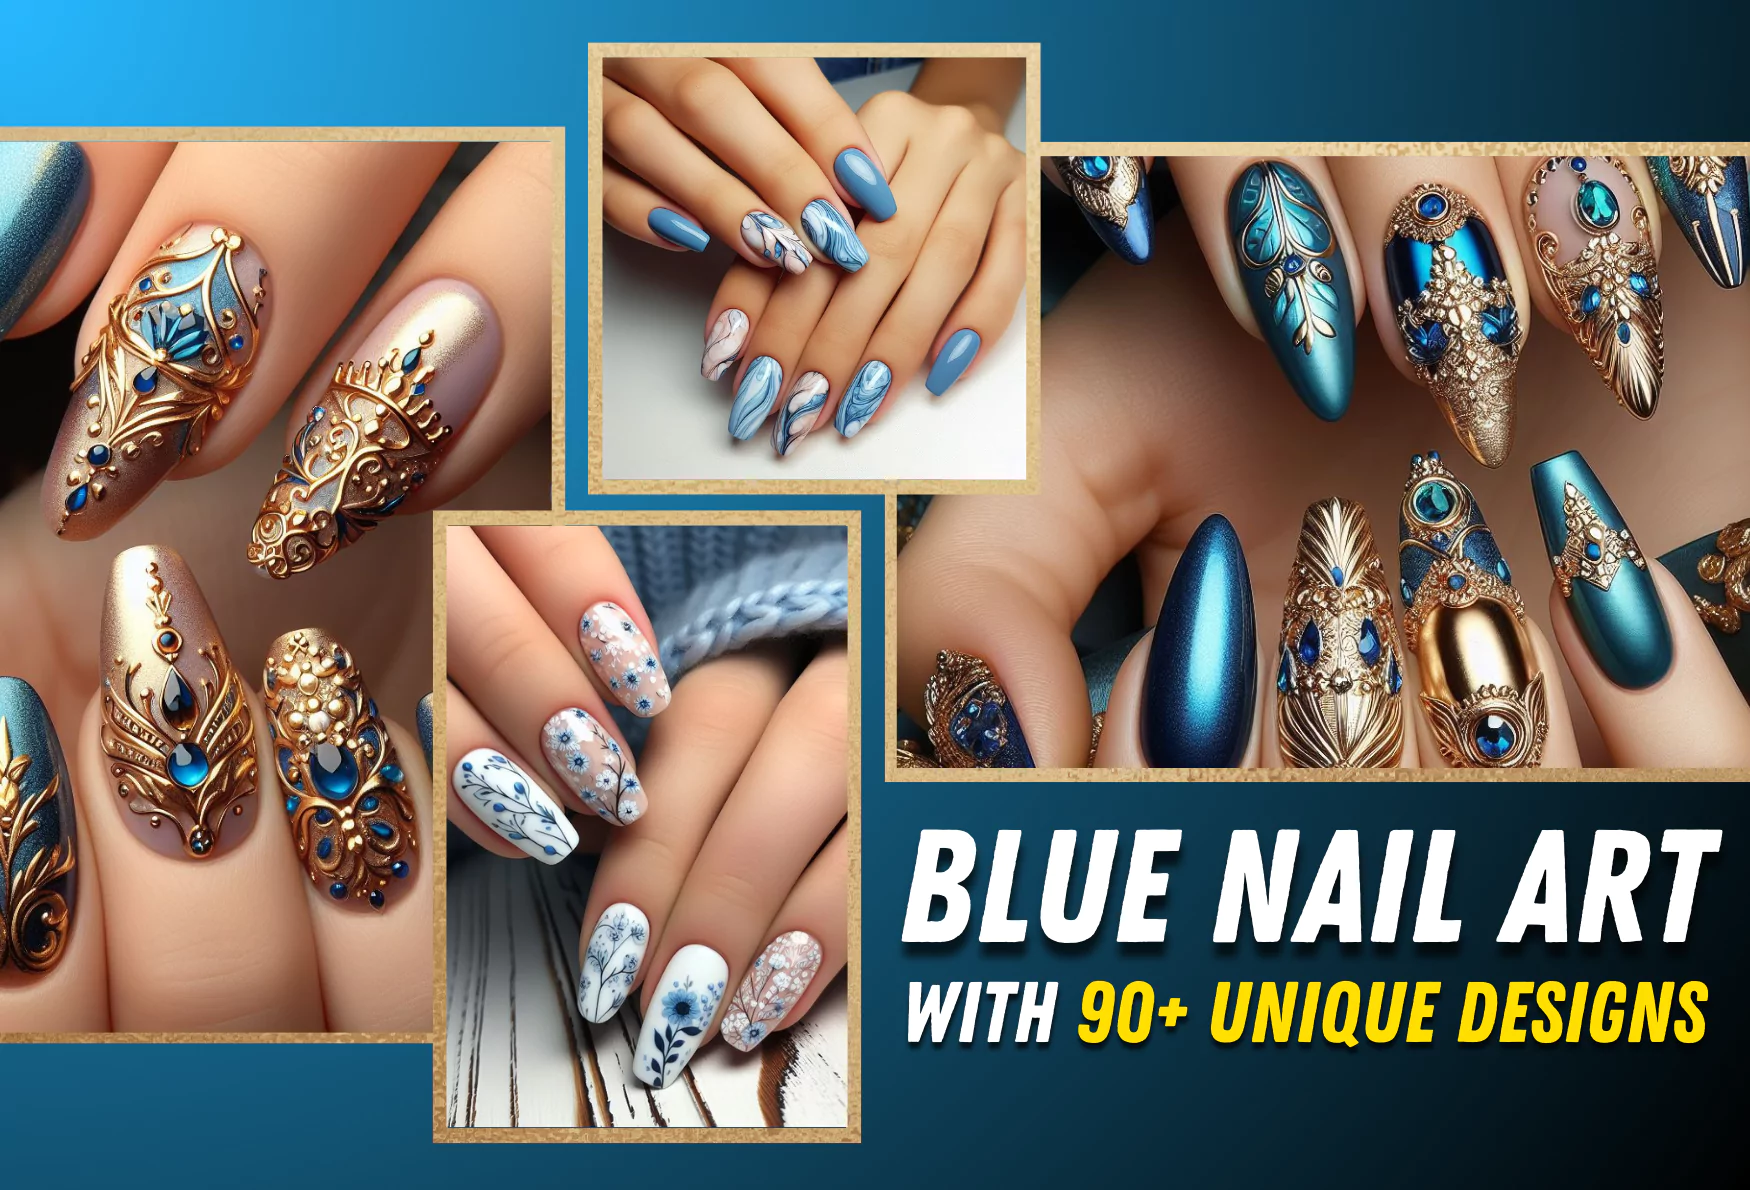 Blue Swirl Nails Design For Summers, Blue And Pink Ombre Nails Design, Blue And White Nails With Flowers, Blue French Tip Nail Design, Glitter Royal Blue Sparkle Coffin Nails, Blue Abstract Nails, Blue And Silver Chrome Nail Art Designs, Blue Cheetah & Leopard Print Nails, Blue Geometric Nail Art Design, Blue Marble Nail Art Designs, Blue And White Stripes Nails, Light Blue Doted Nail Designs Ideas, Light Blue And Gold Luxry Nail Art Designs, Holographic Nails Blue, Nail Design Art Ideas With Blue And Pink Color, Blue Nails With Flower Designs, Blue Galaxy Nails Design Ideas, Black And Blue Nail Art Design, Blue and White Stripes Nail Deisgn, Blue And Silver Nail Art Design,